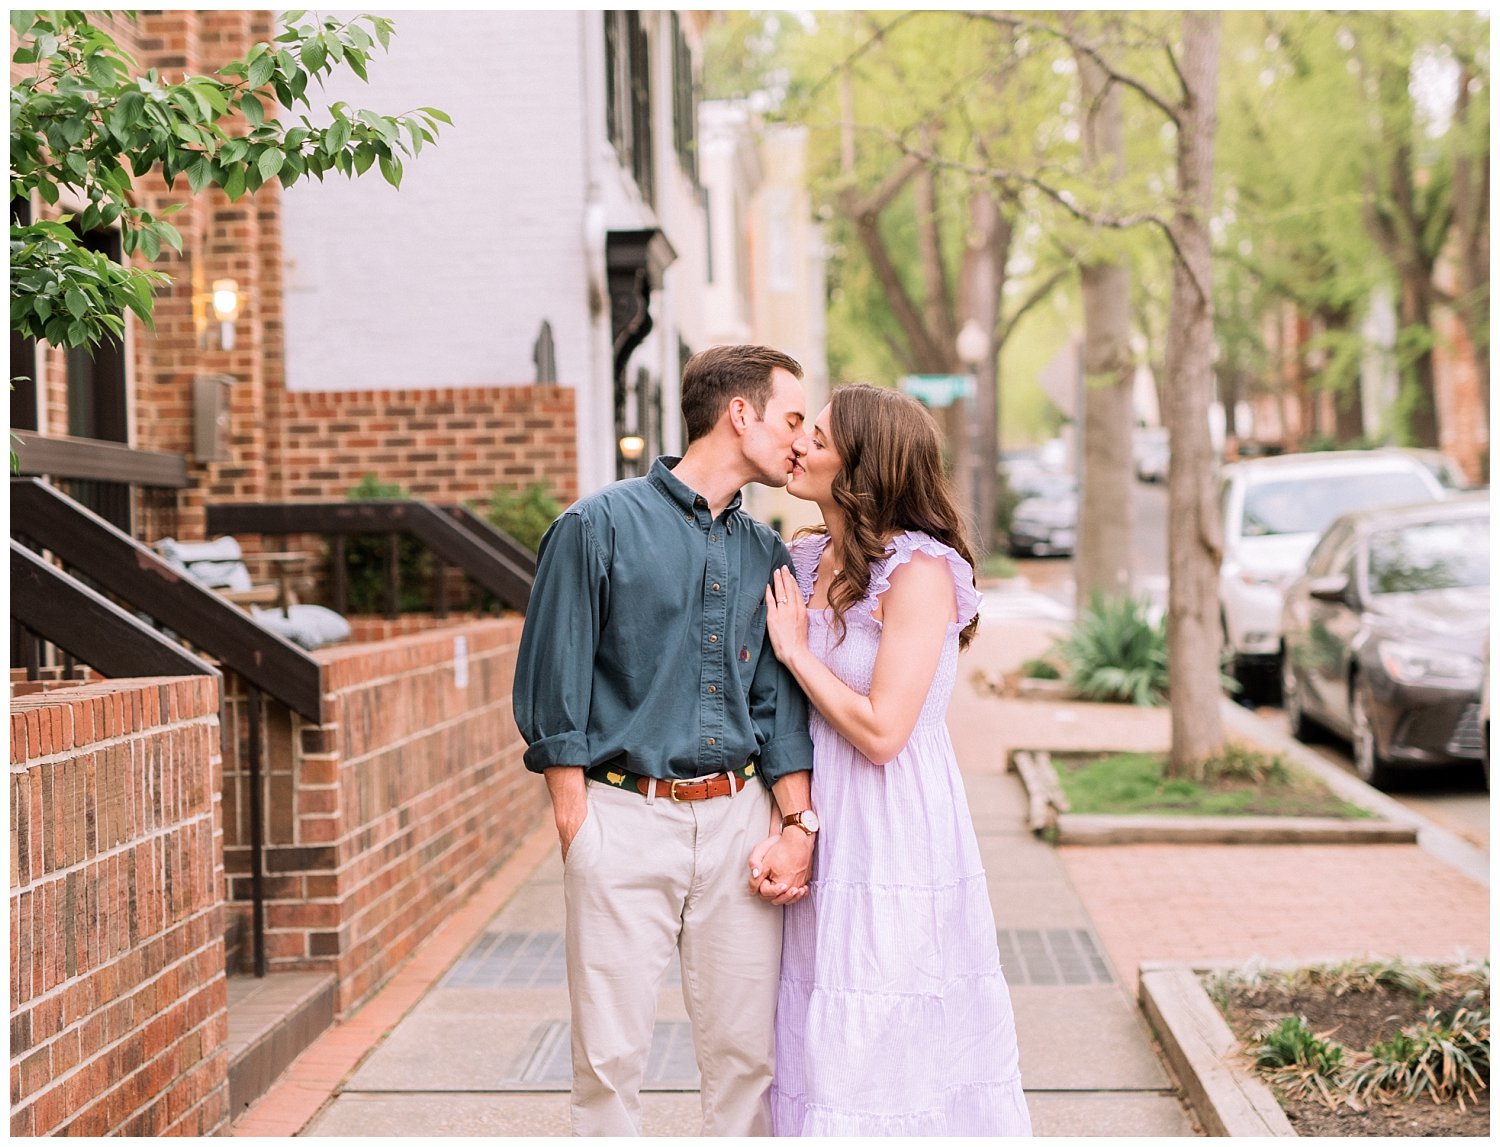 Intimate city engagement session in Georgetown, DC. Photographed by Southern Virginia photographer Heather Dodge.